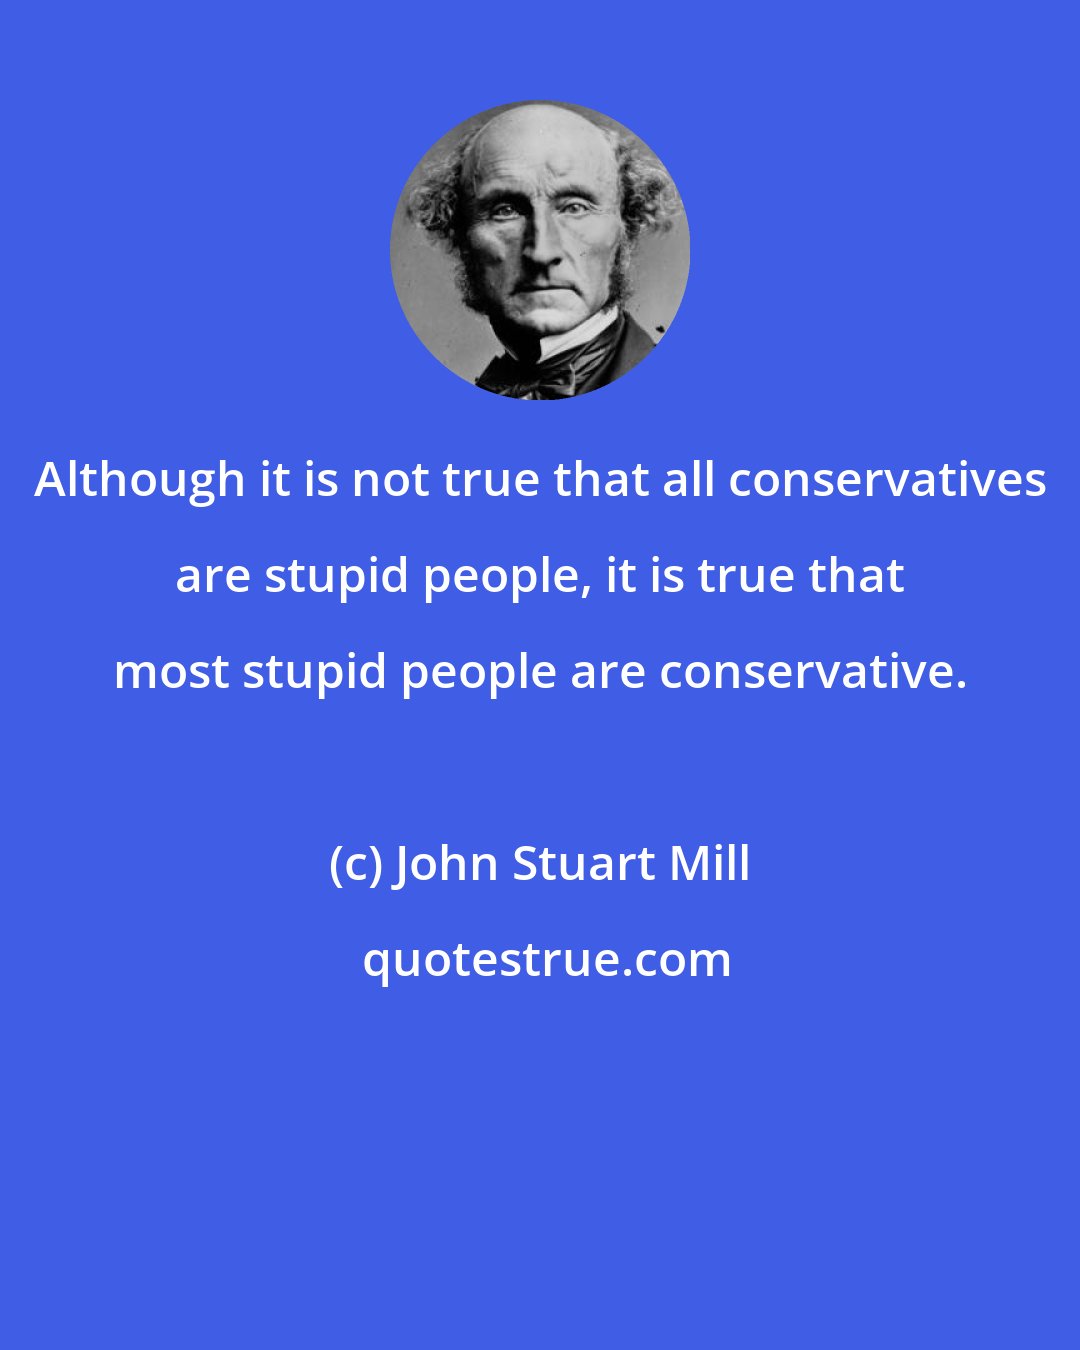 John Stuart Mill: Although it is not true that all conservatives are stupid people, it is true that most stupid people are conservative.